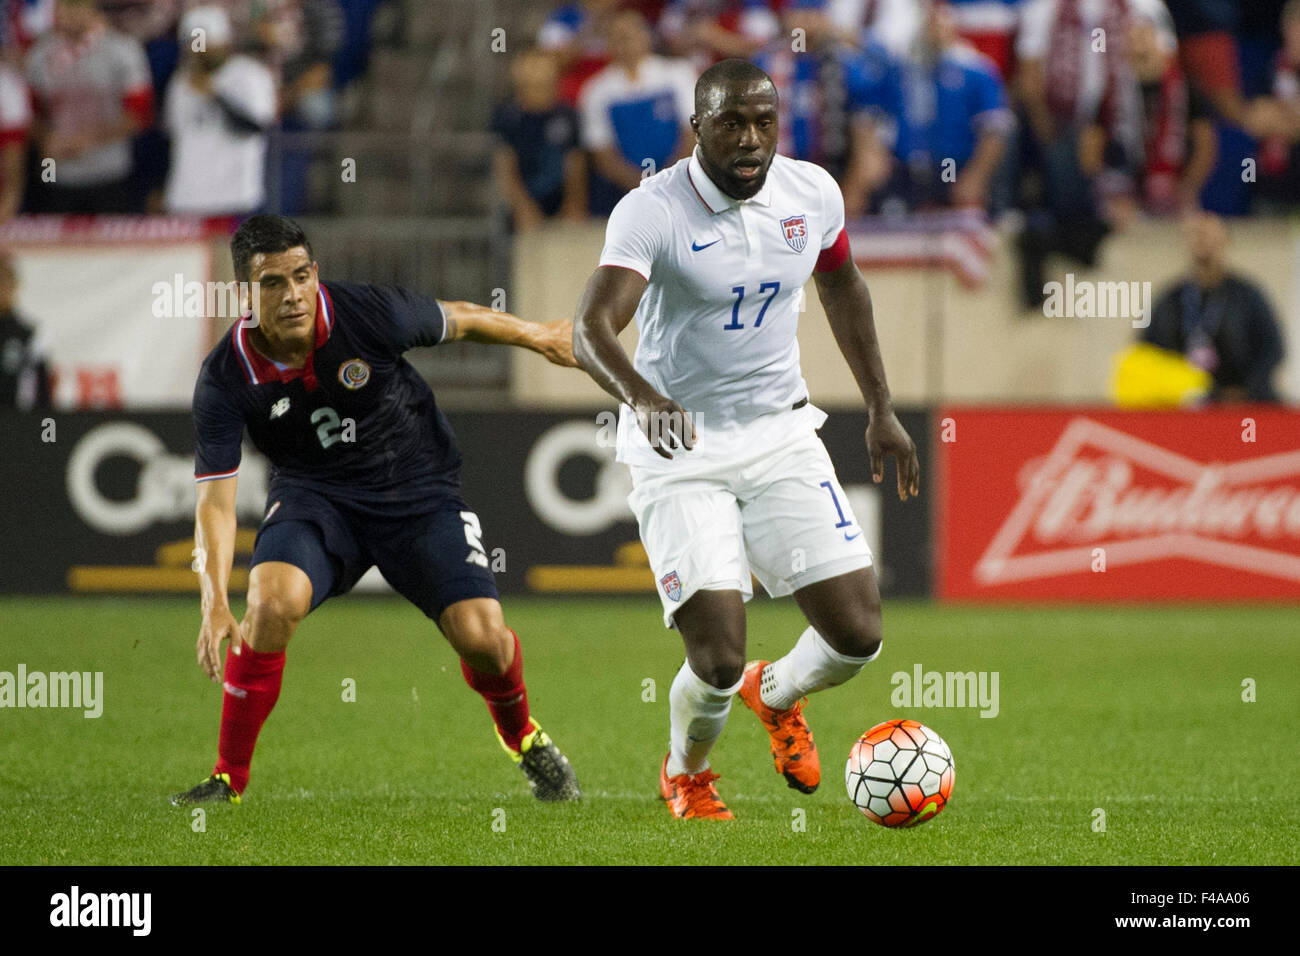 October 13, 2015: USA forward Jozy Altidore (17) moves the ball as Costa Rica defender Johnny Acosta (2) looks on during The USA Men's National Team vs. Costa Rica Men's National Team- international friendly at Red Bull Arena - Harrison, NJ. Mandatory Credit: Kostas Lymperopoulos/Cal Sport Media Stock Photo